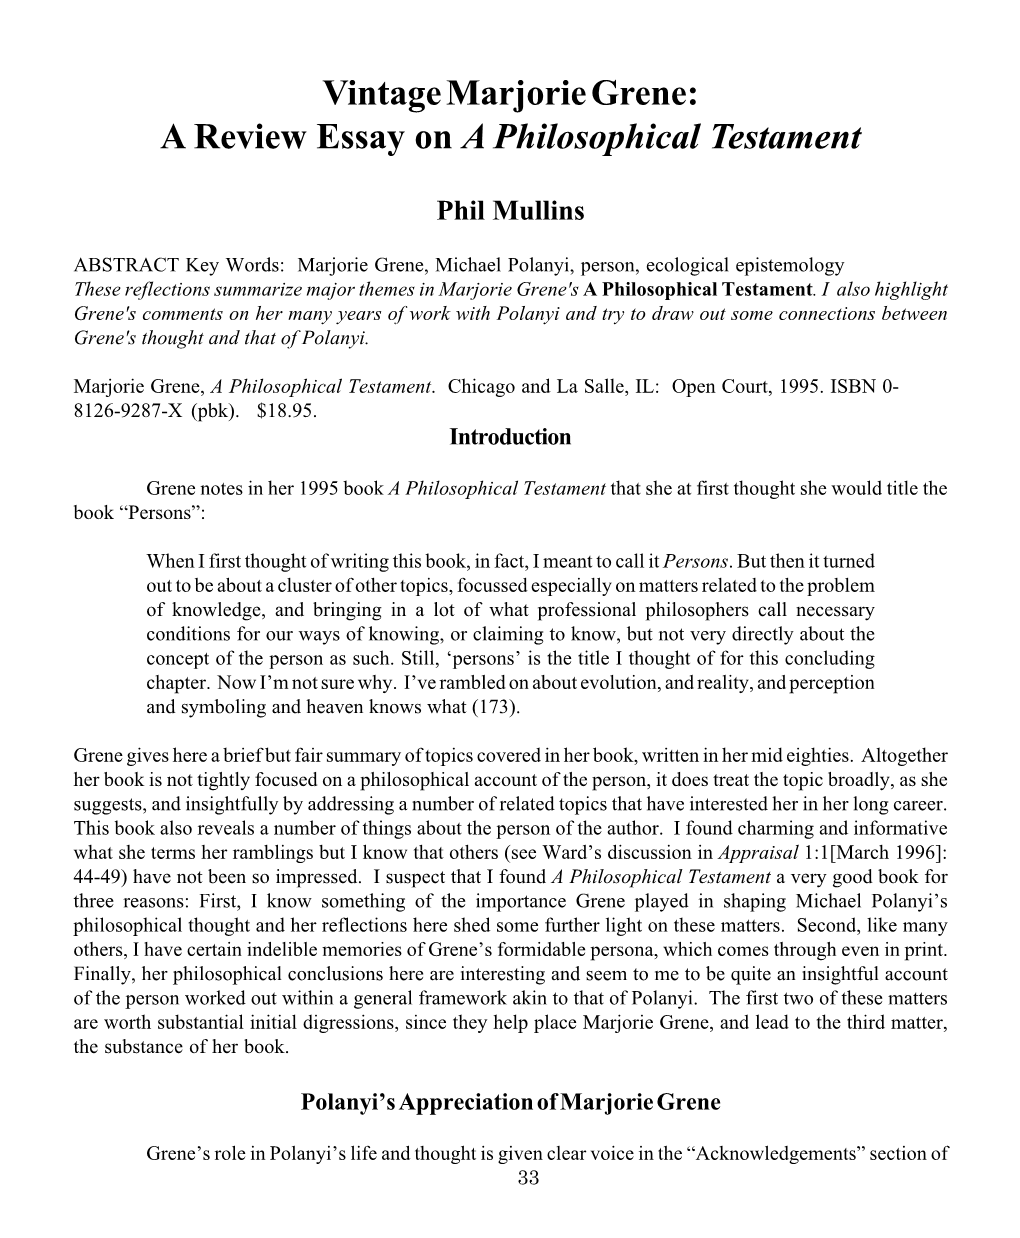 Vintage Marjorie Grene: a Review Essay on a Philosophical Testament